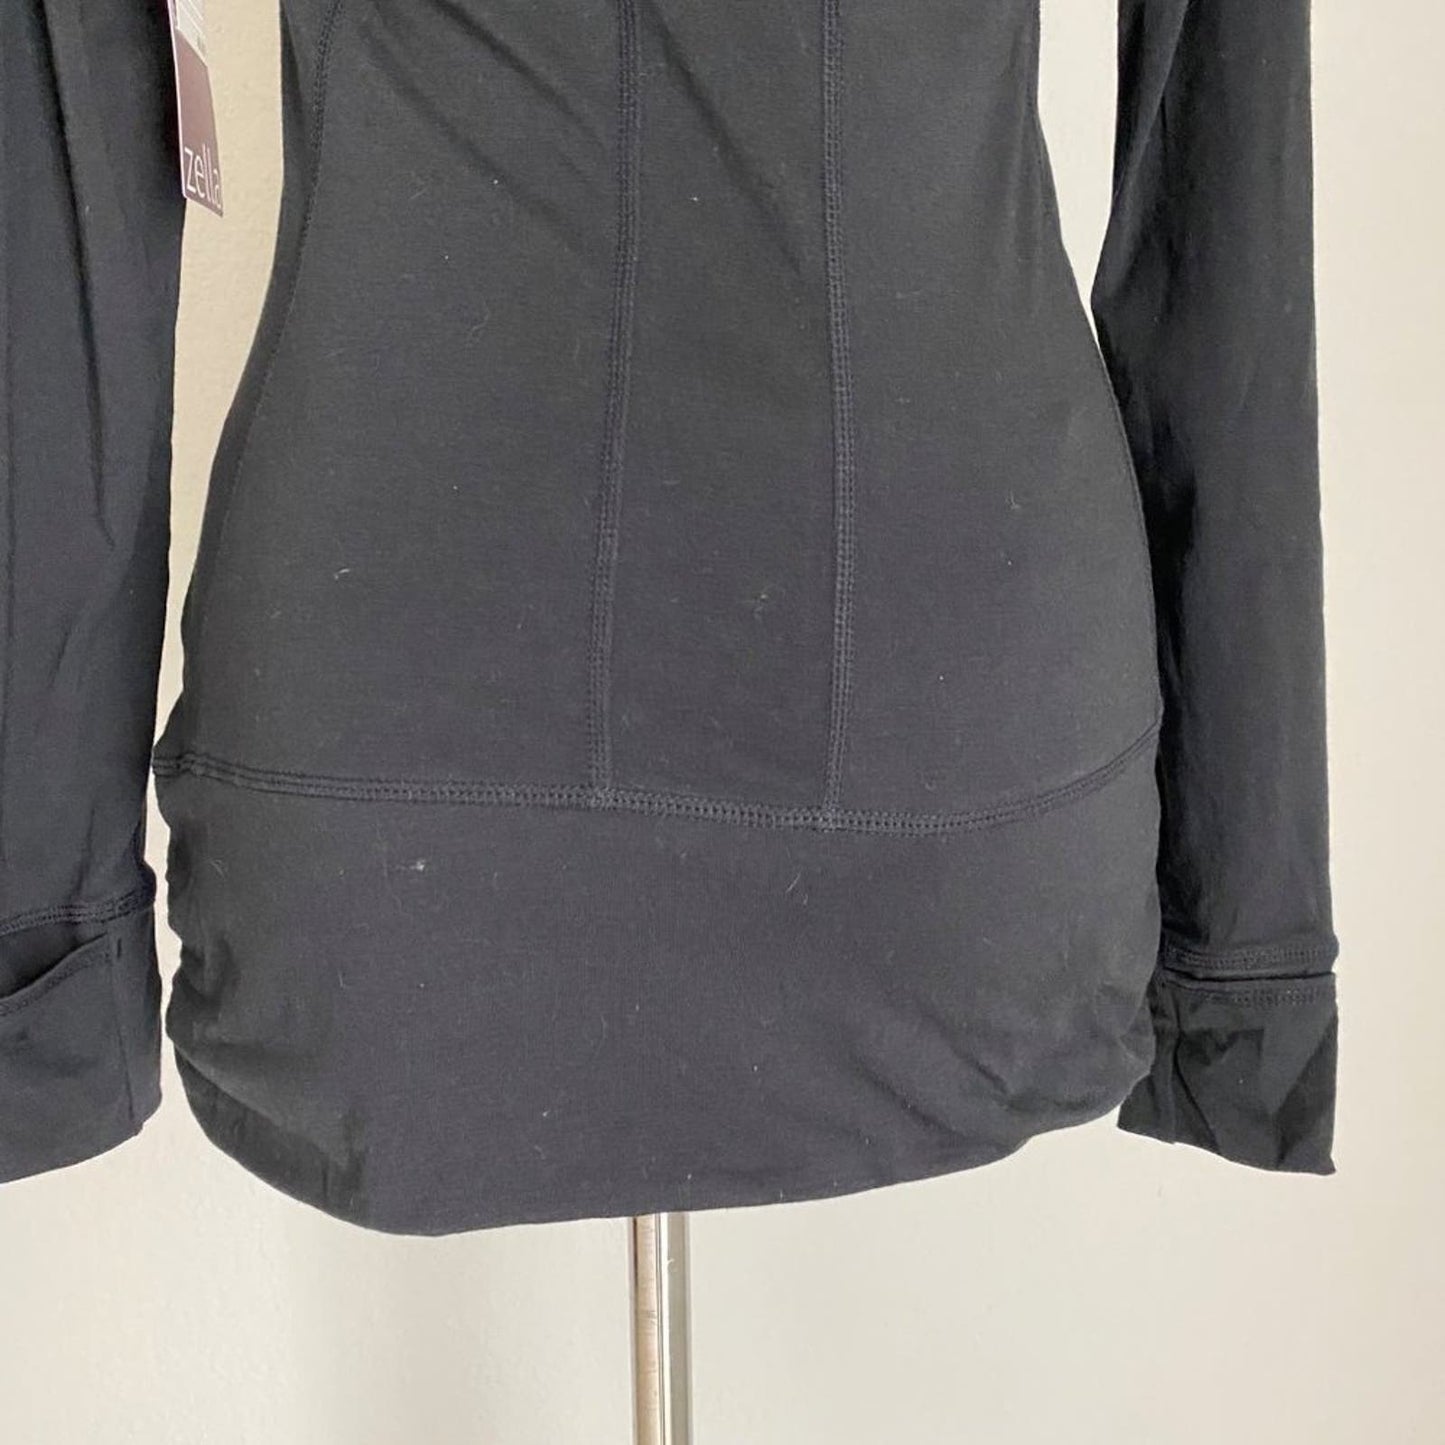 Zella sz XS  hooded scoop neck work out top shirt NWT